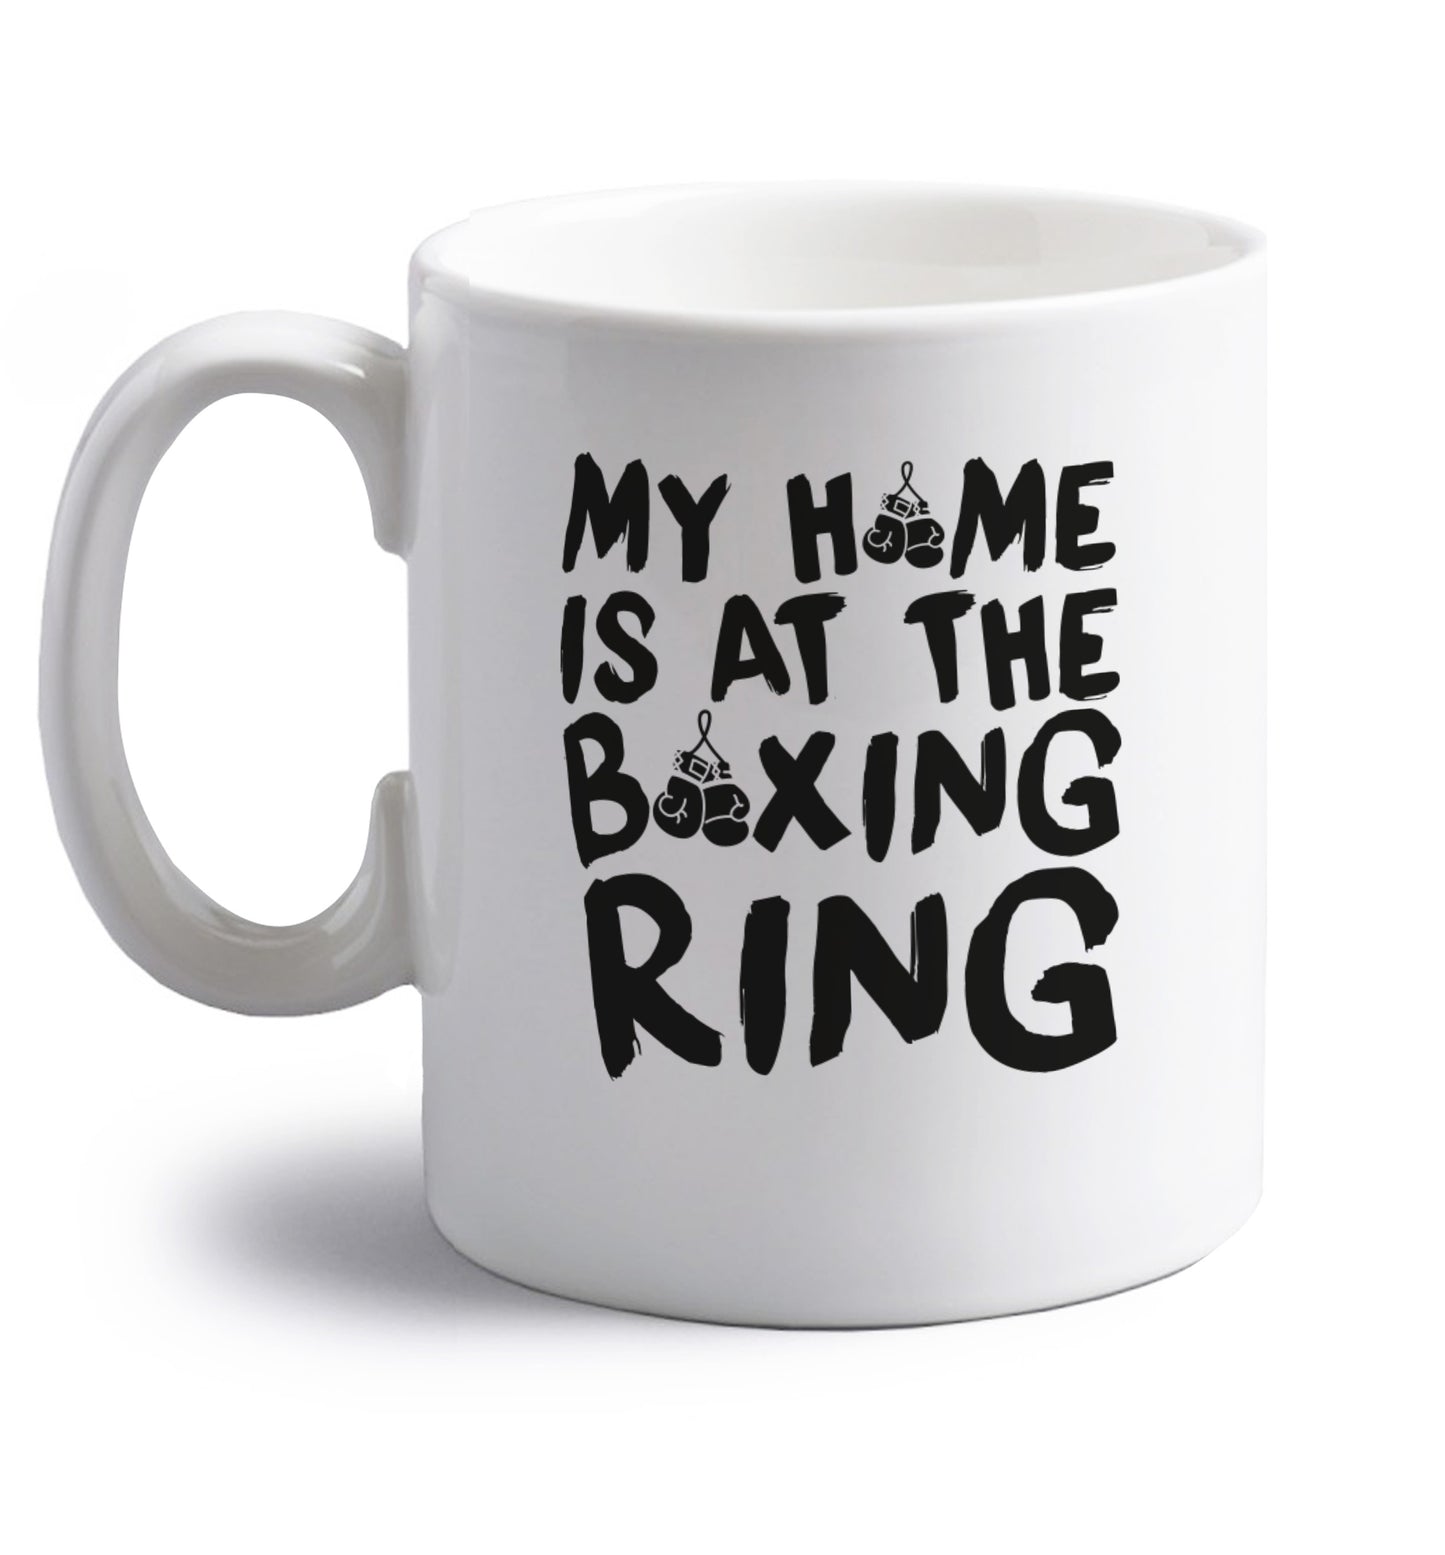 My home is at the boxing ring right handed white ceramic mug 